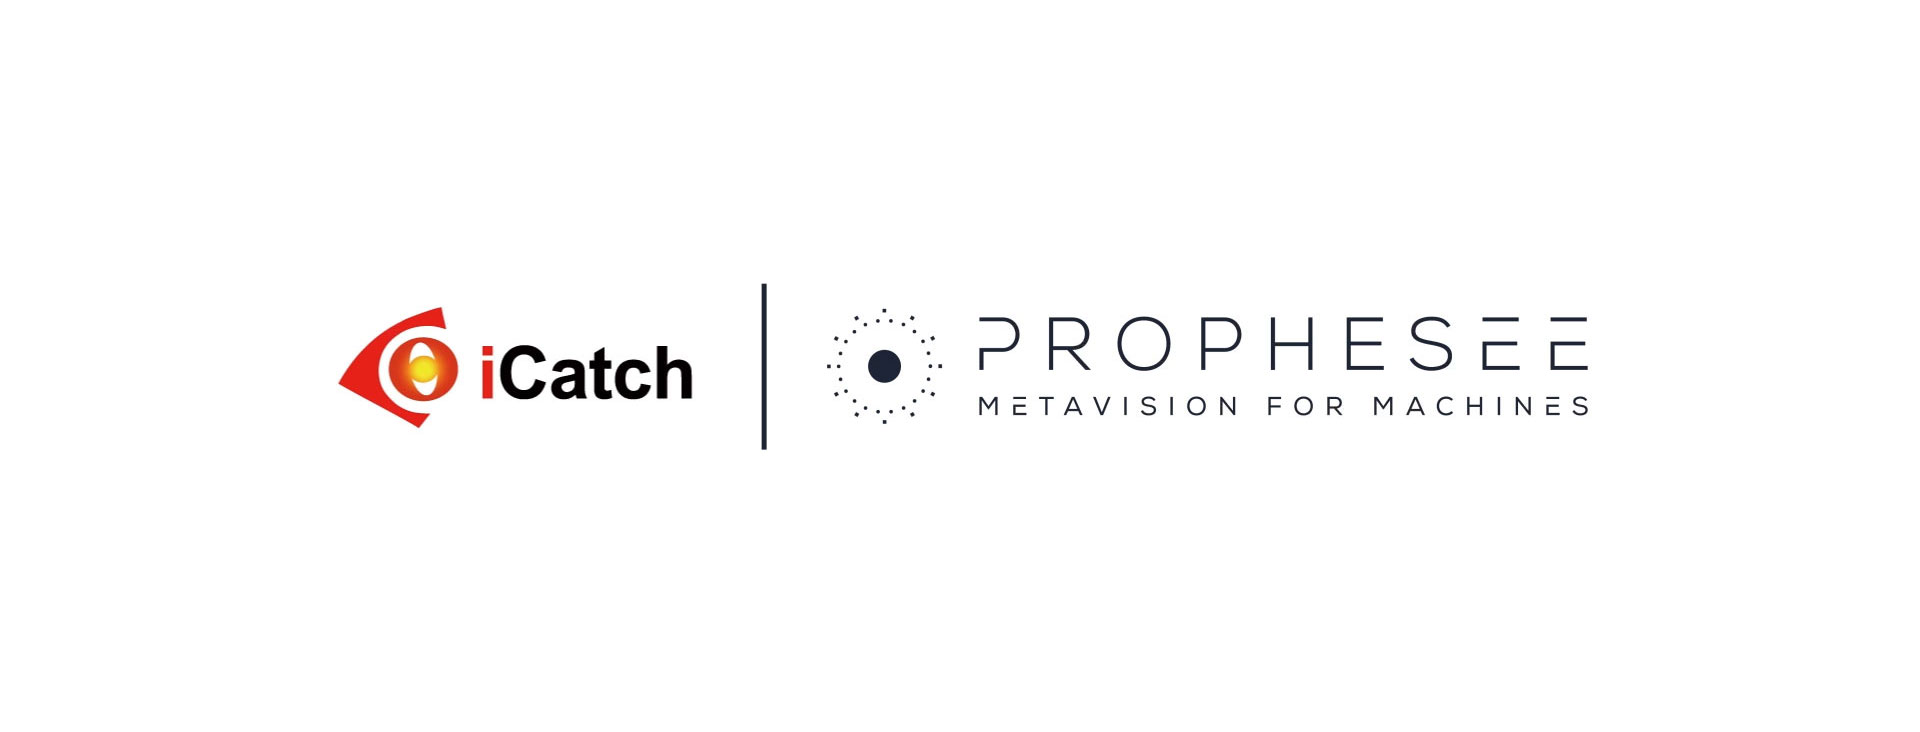 iCatch-Prophesee